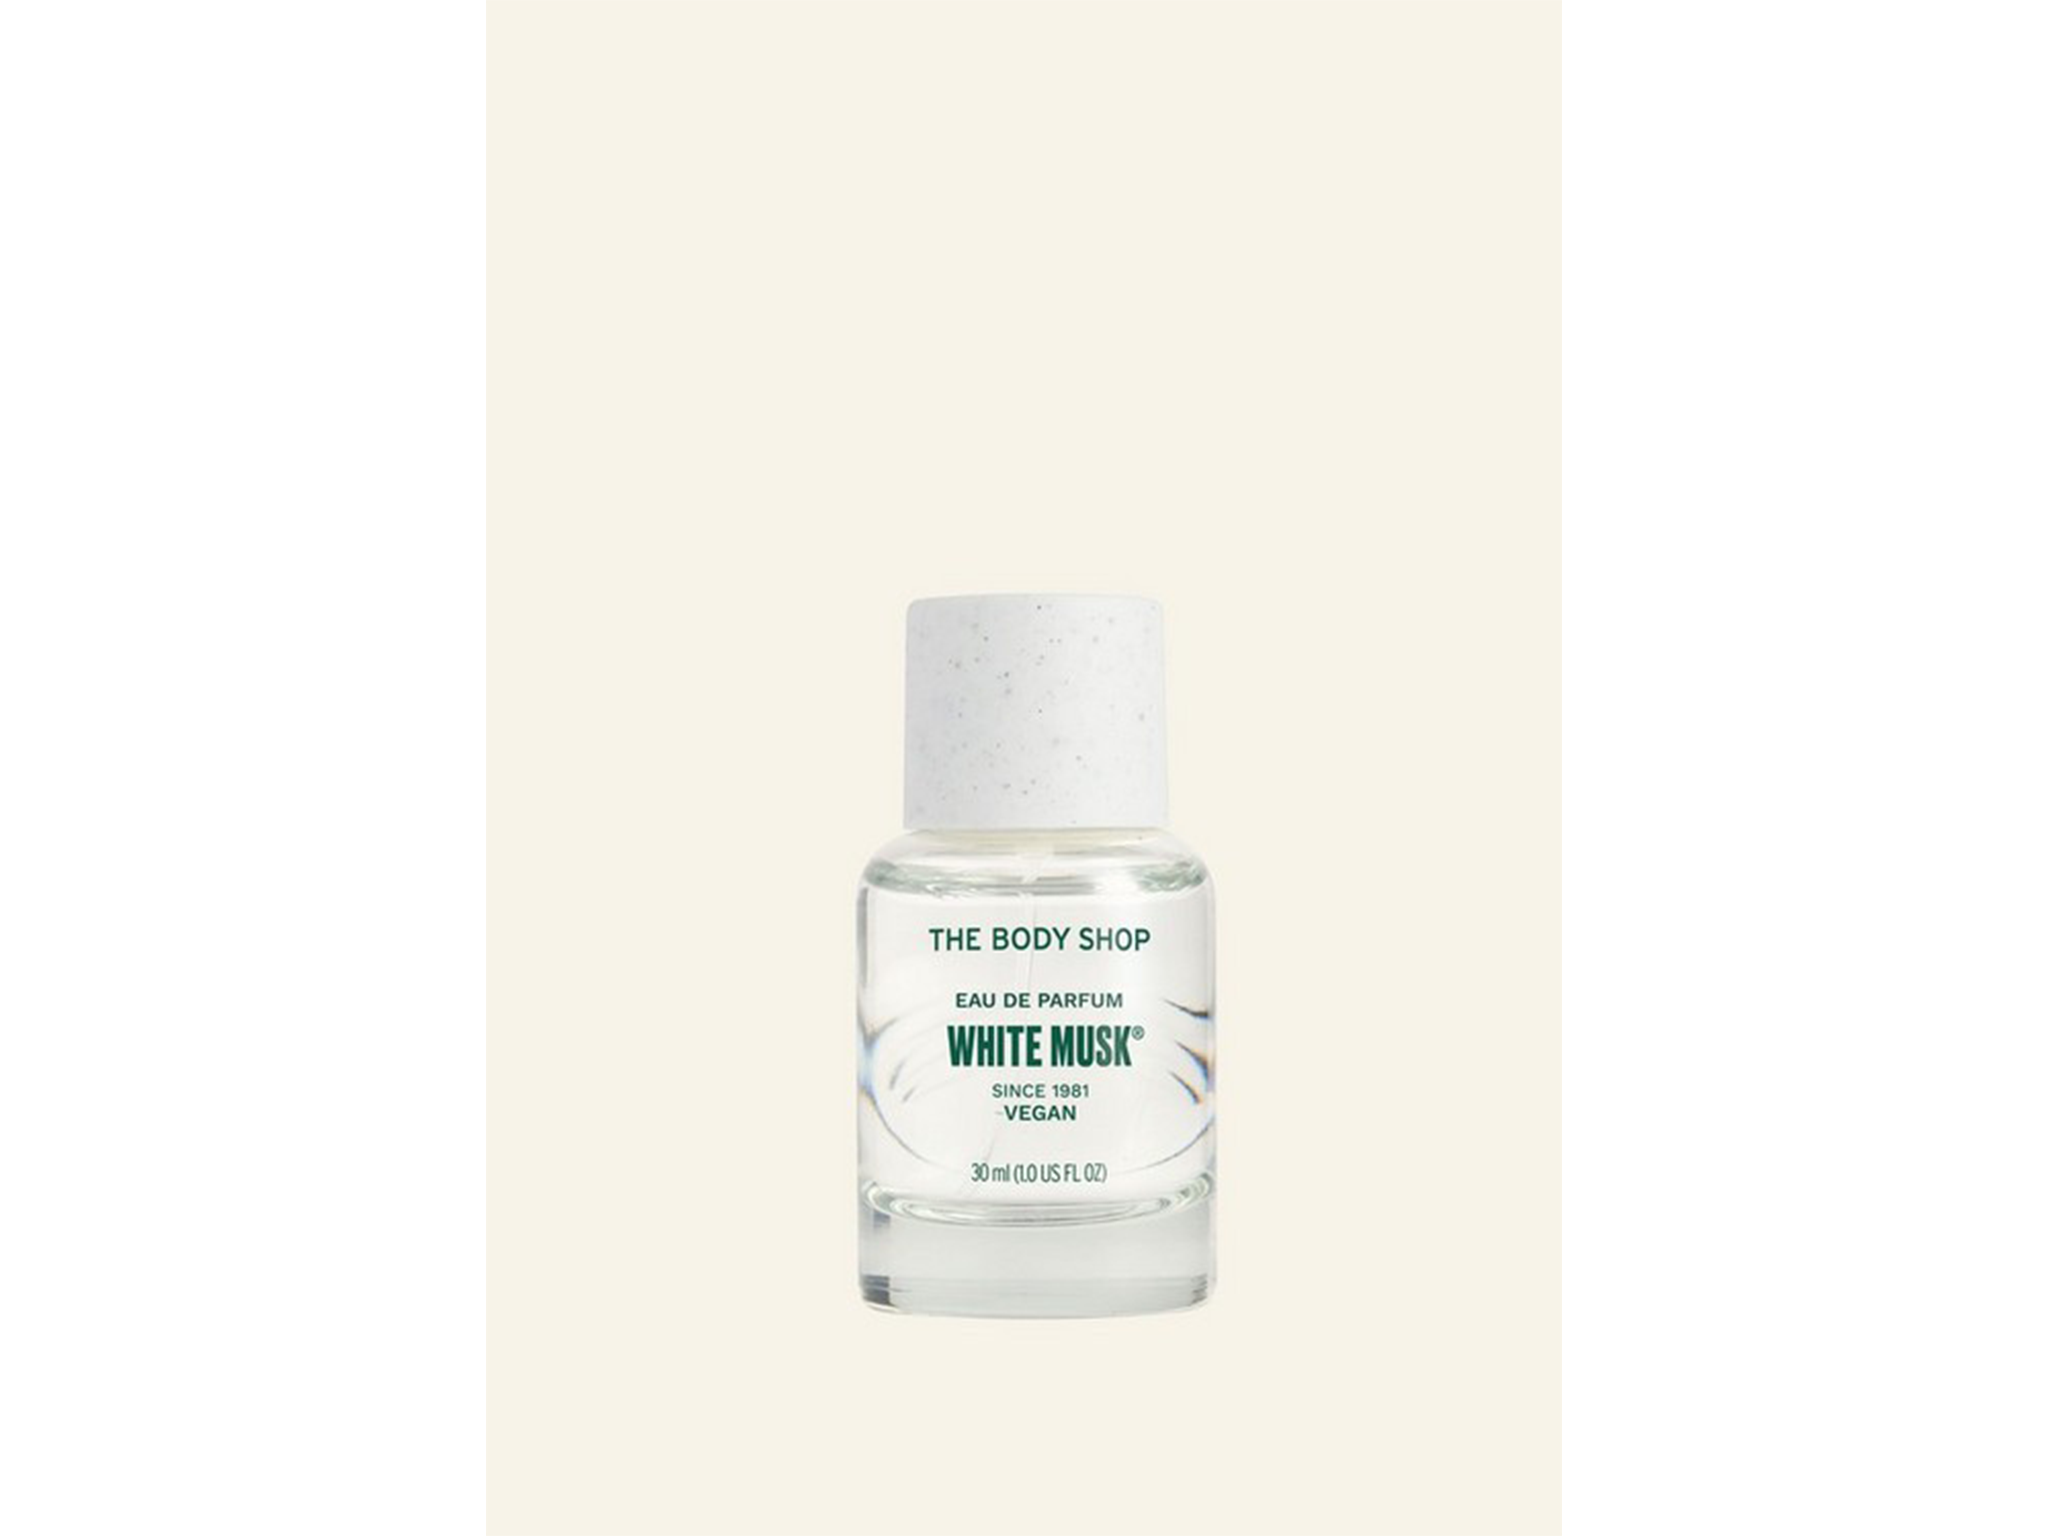 THE BODY SHOP – WHITE MUSK (RE-LAUNCHED)